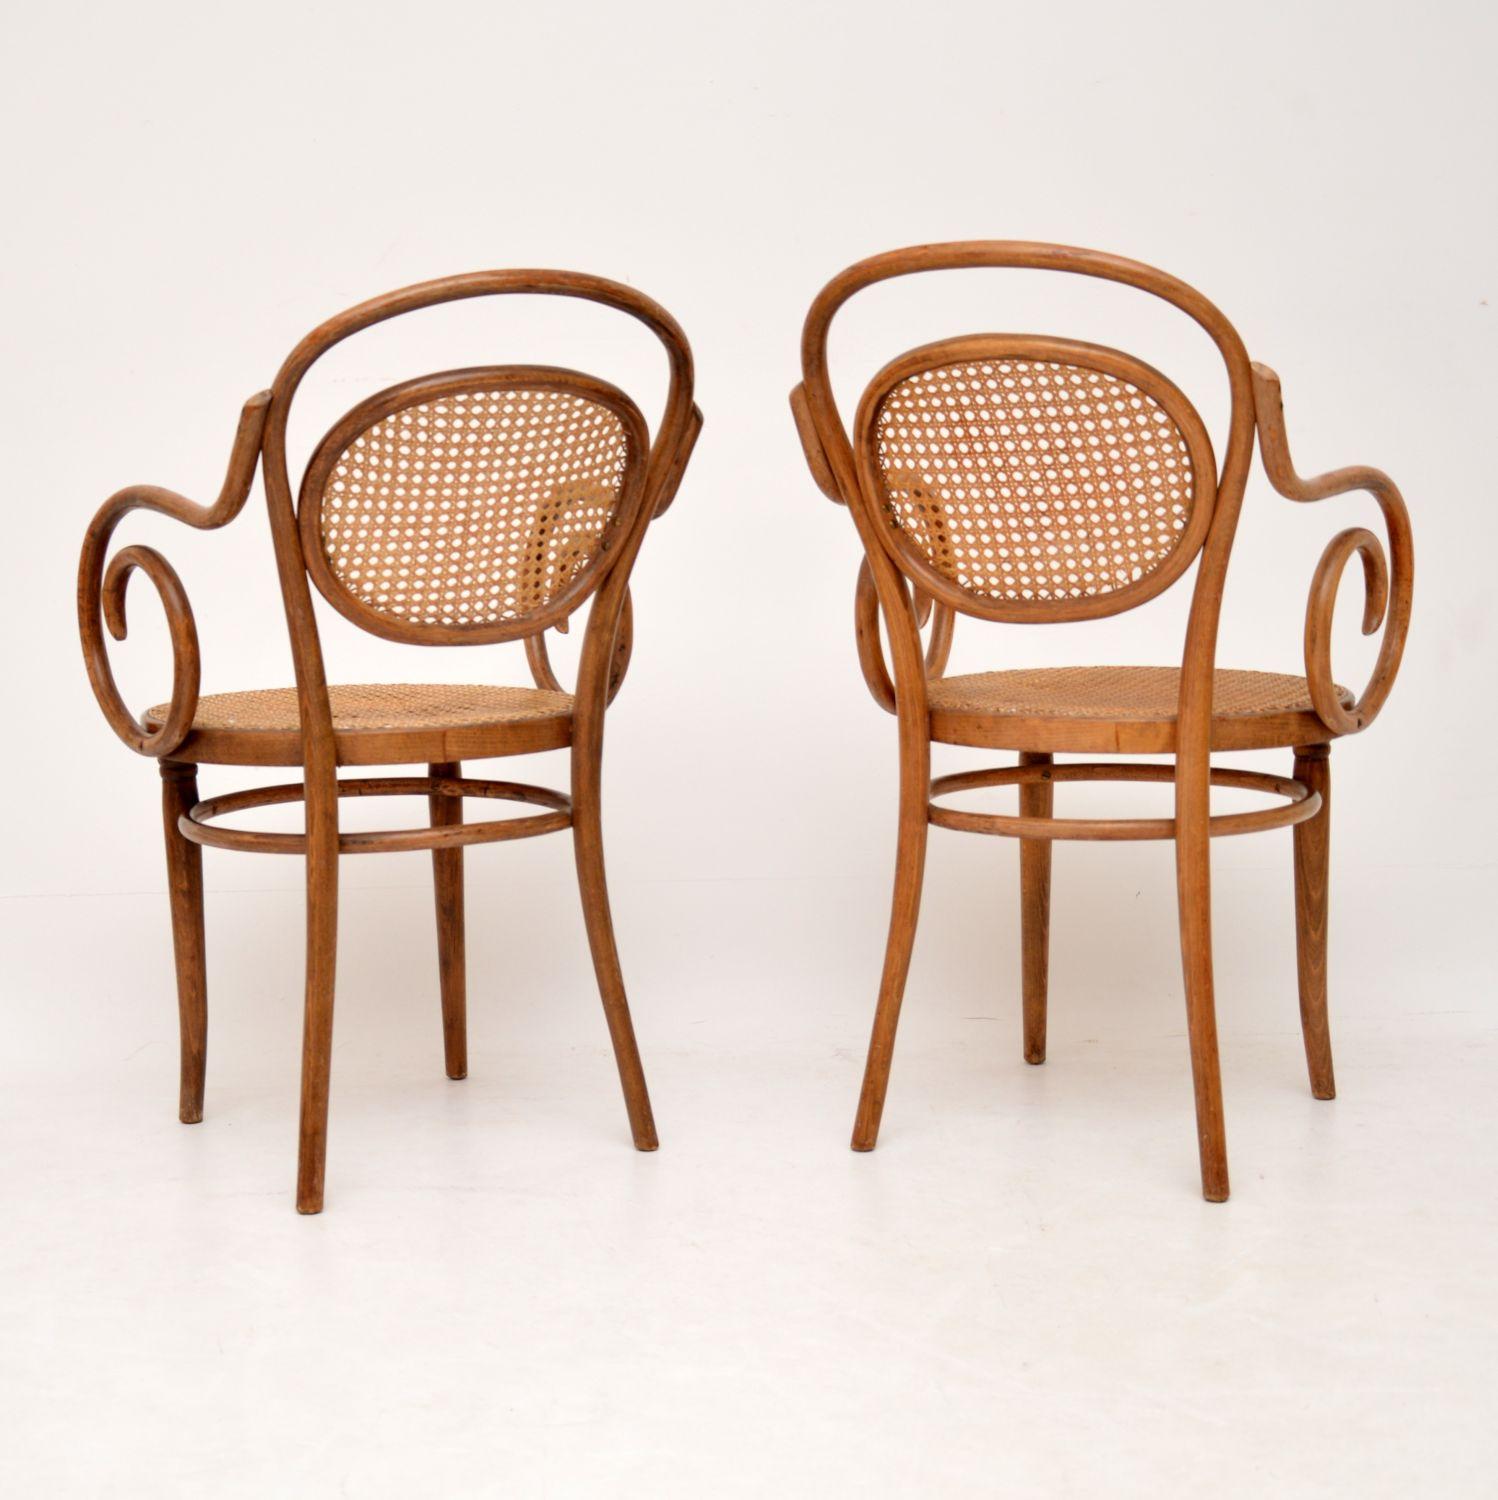 Polish 1950s Set of 4 Vintage Bentwood Thonet Dining Chairs